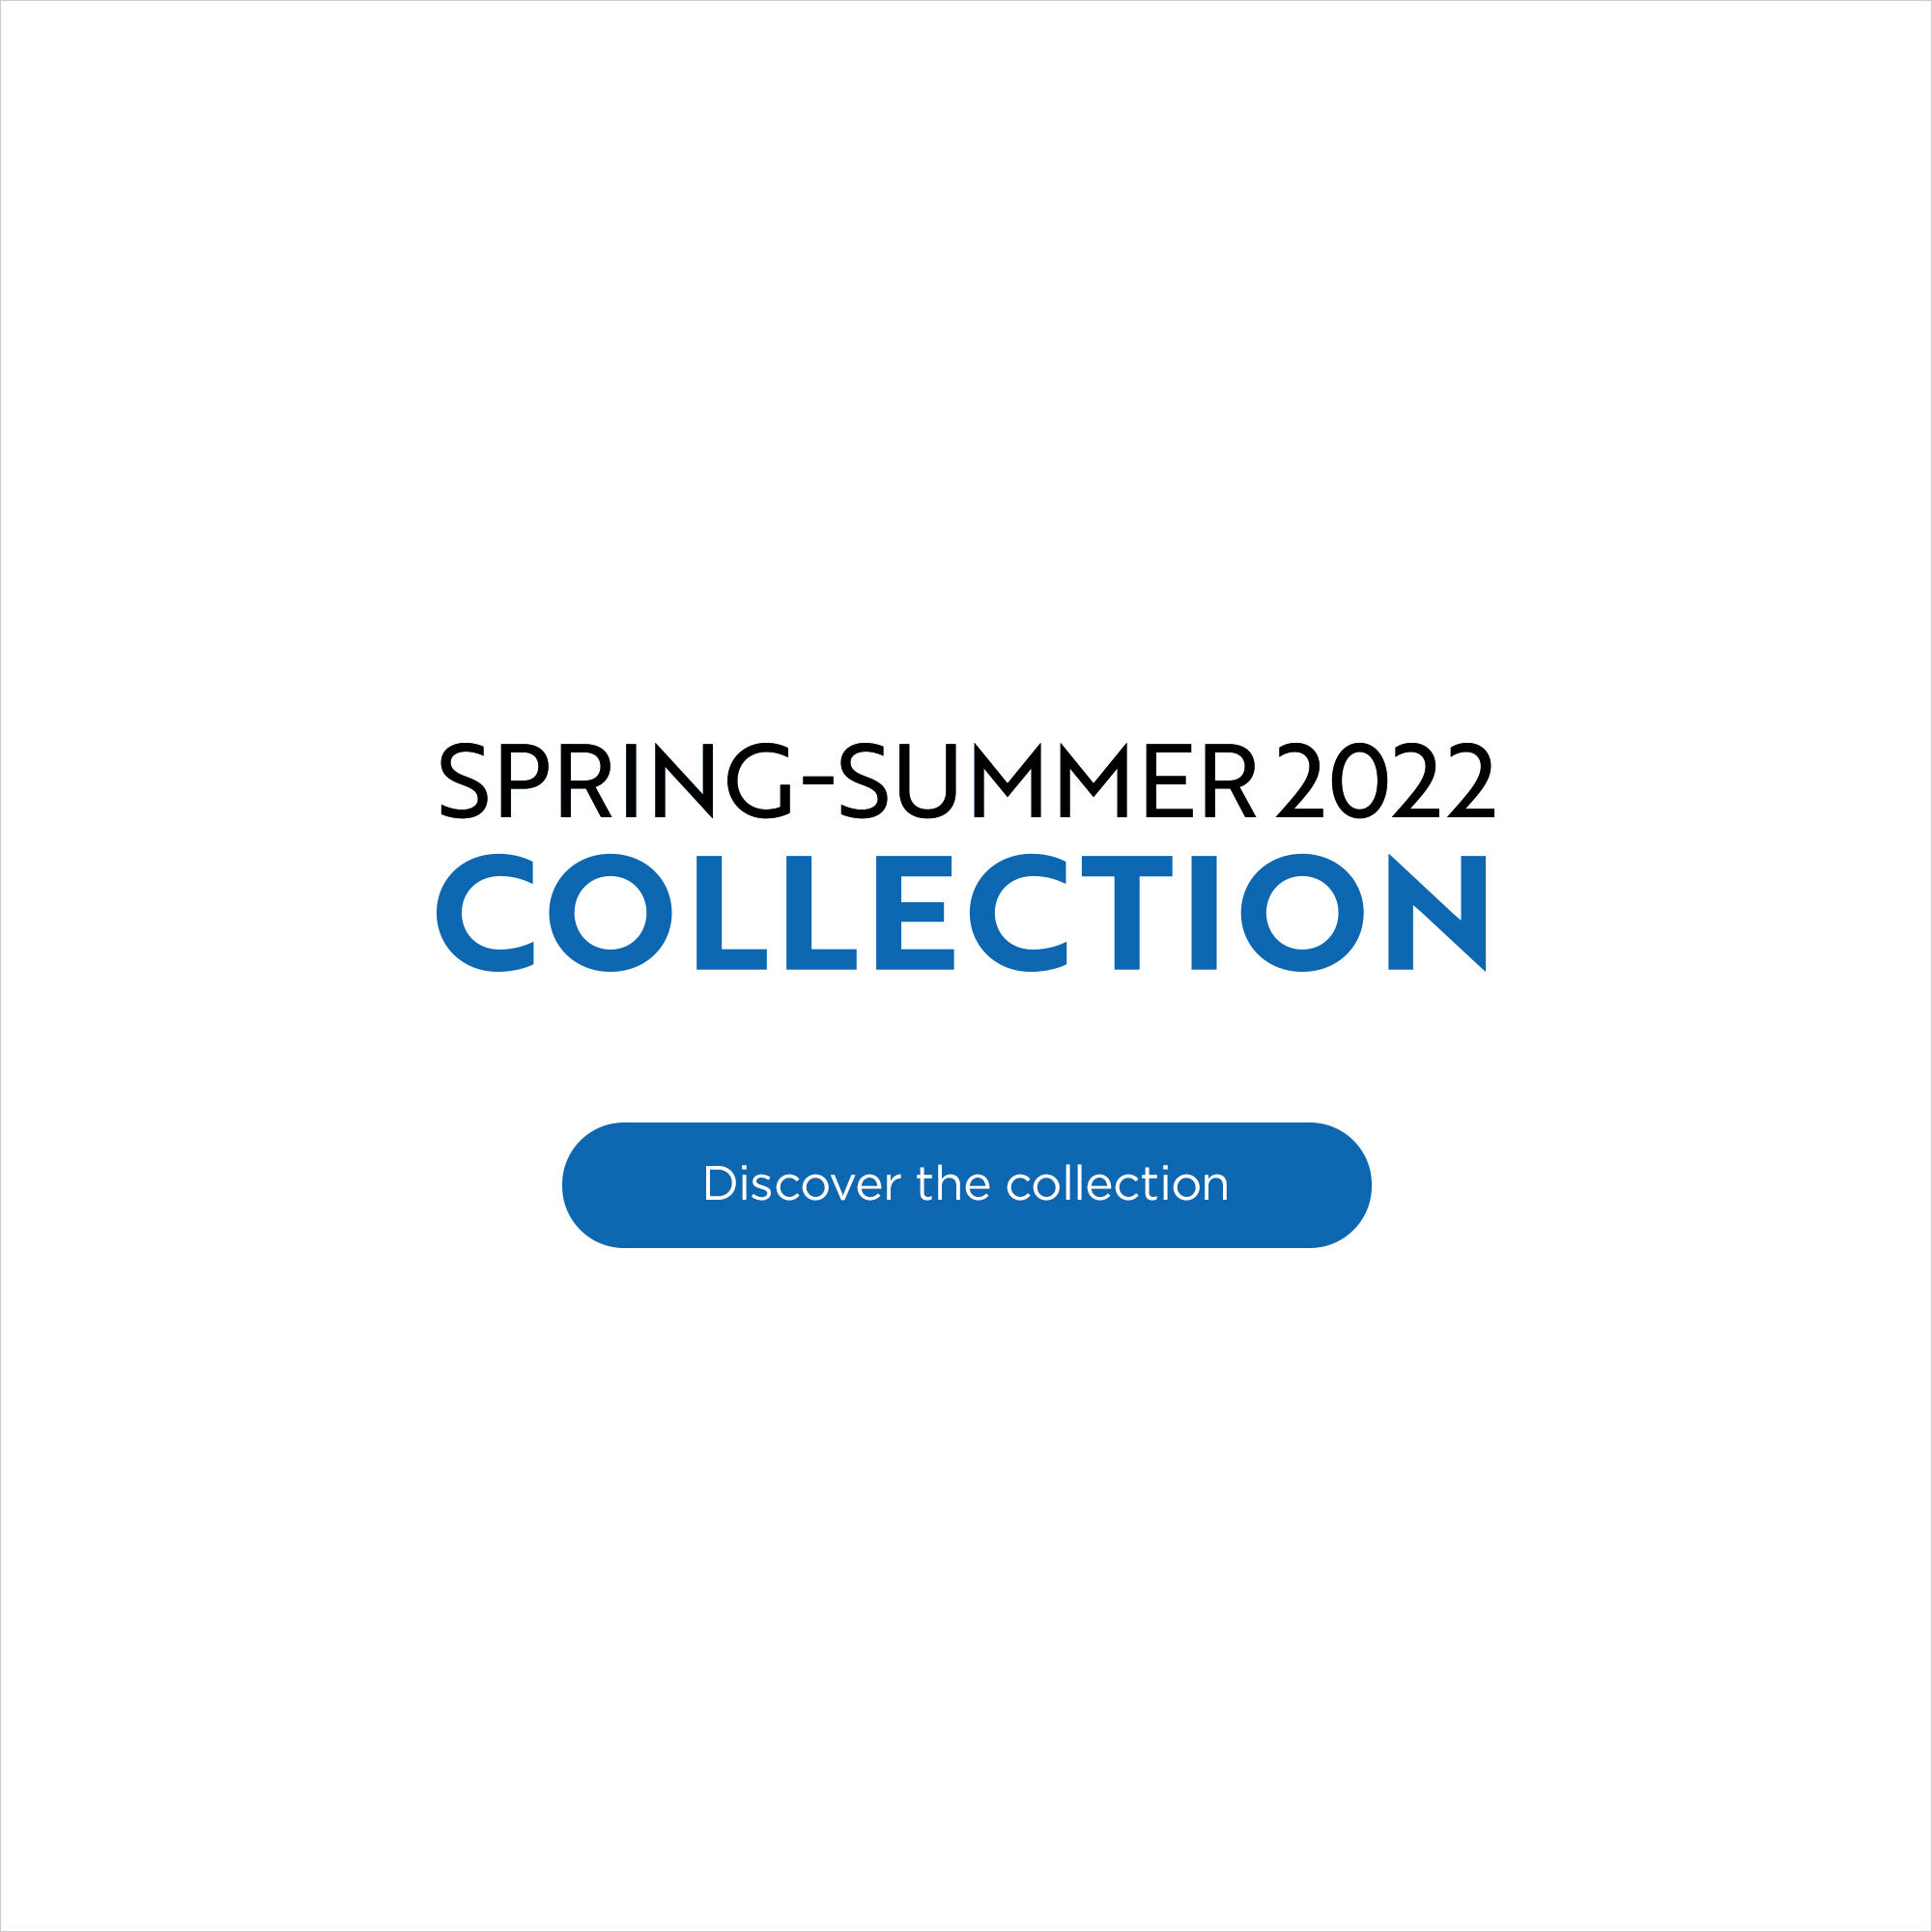 Spring-Summer 2022 Collection